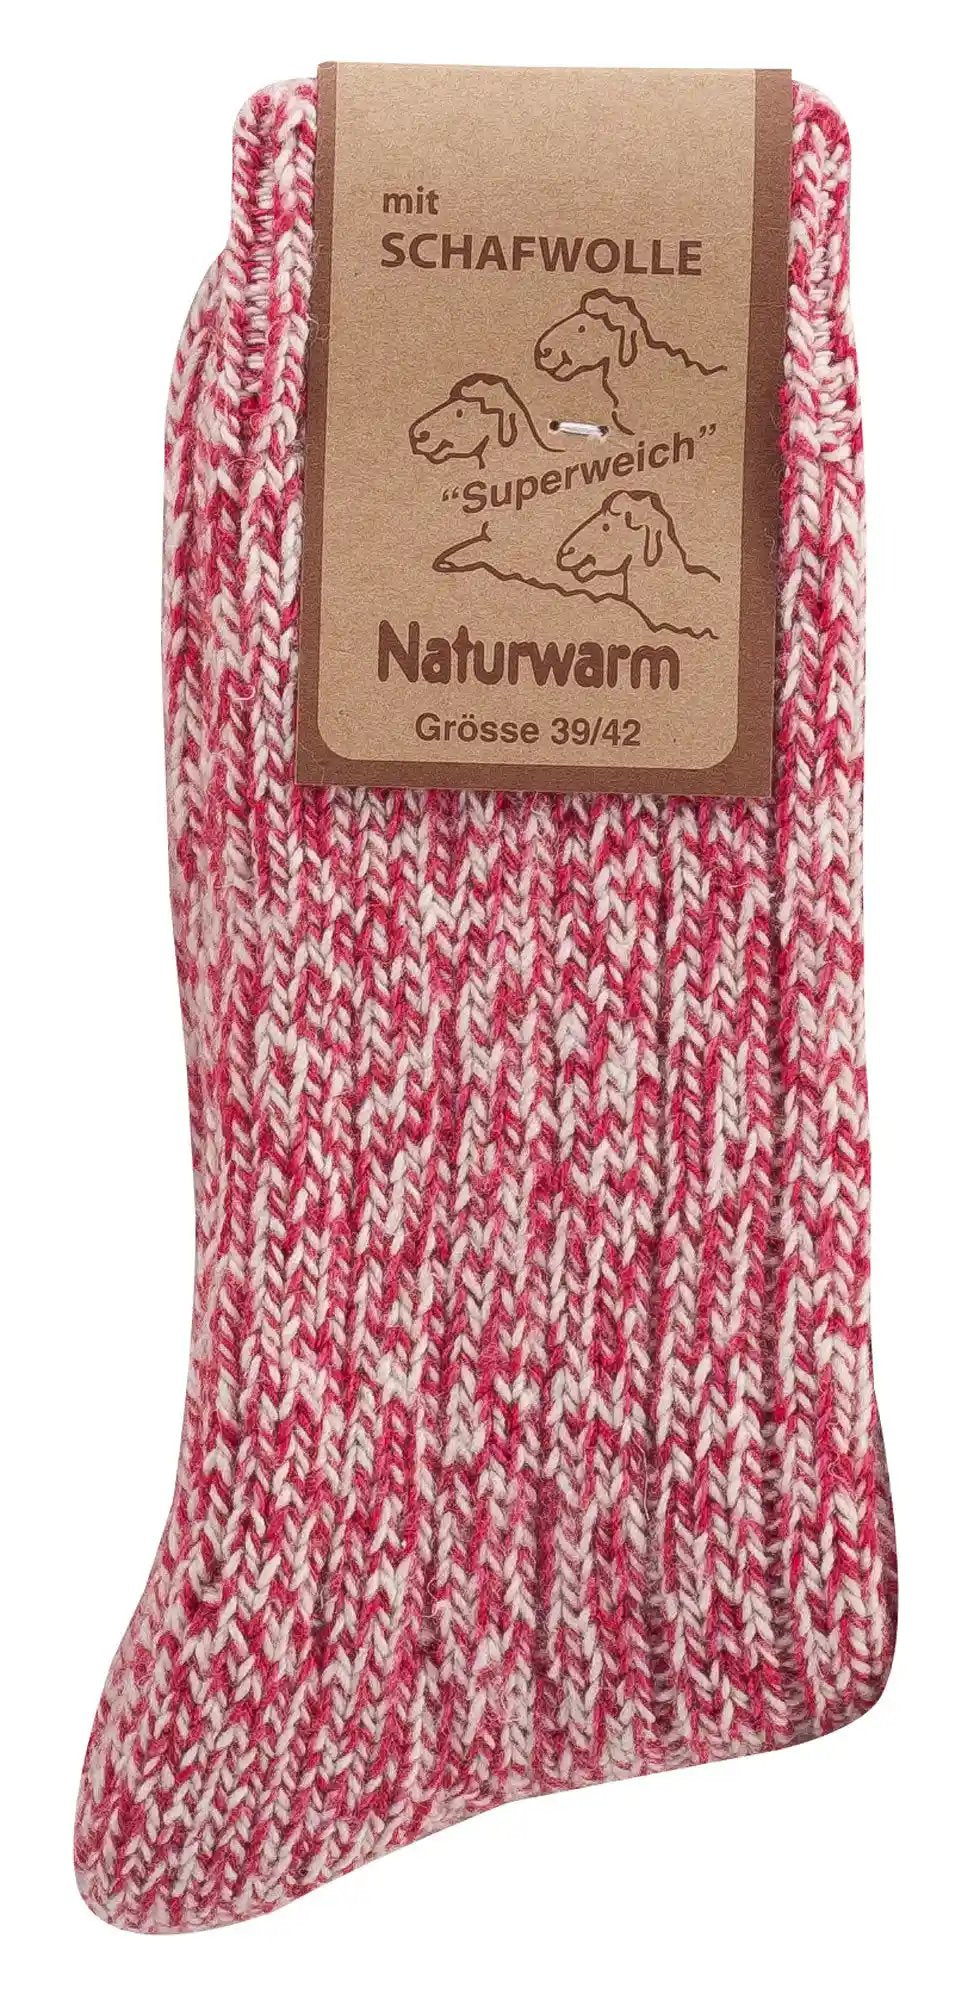 3 or 6 pairs of Norwegian socks with wool in beautiful colors for women and girls